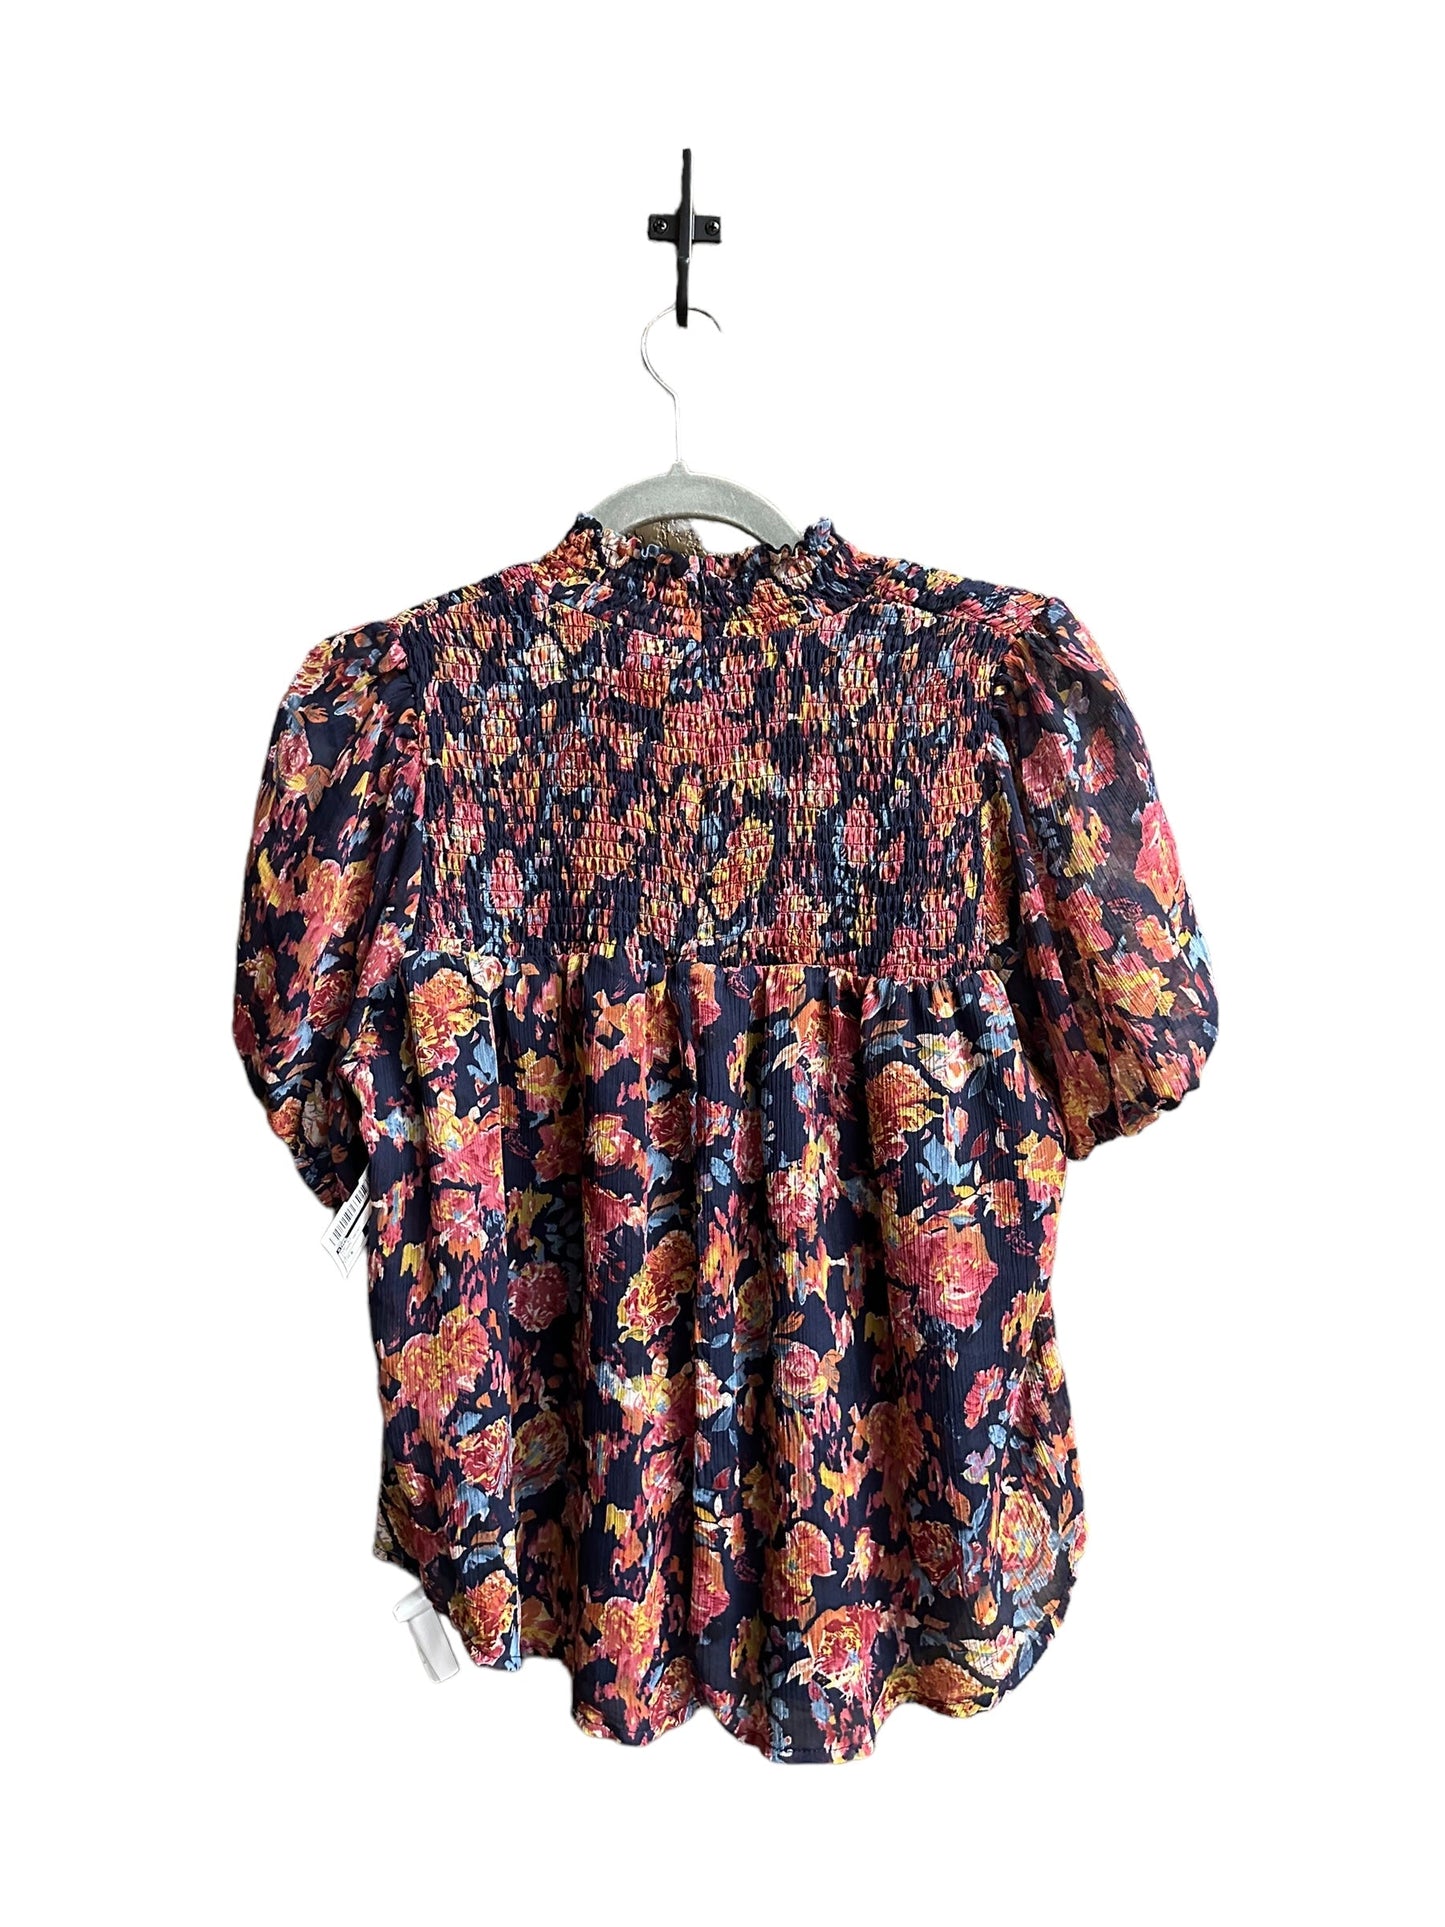 Floral Print Top Short Sleeve Thml, Size S